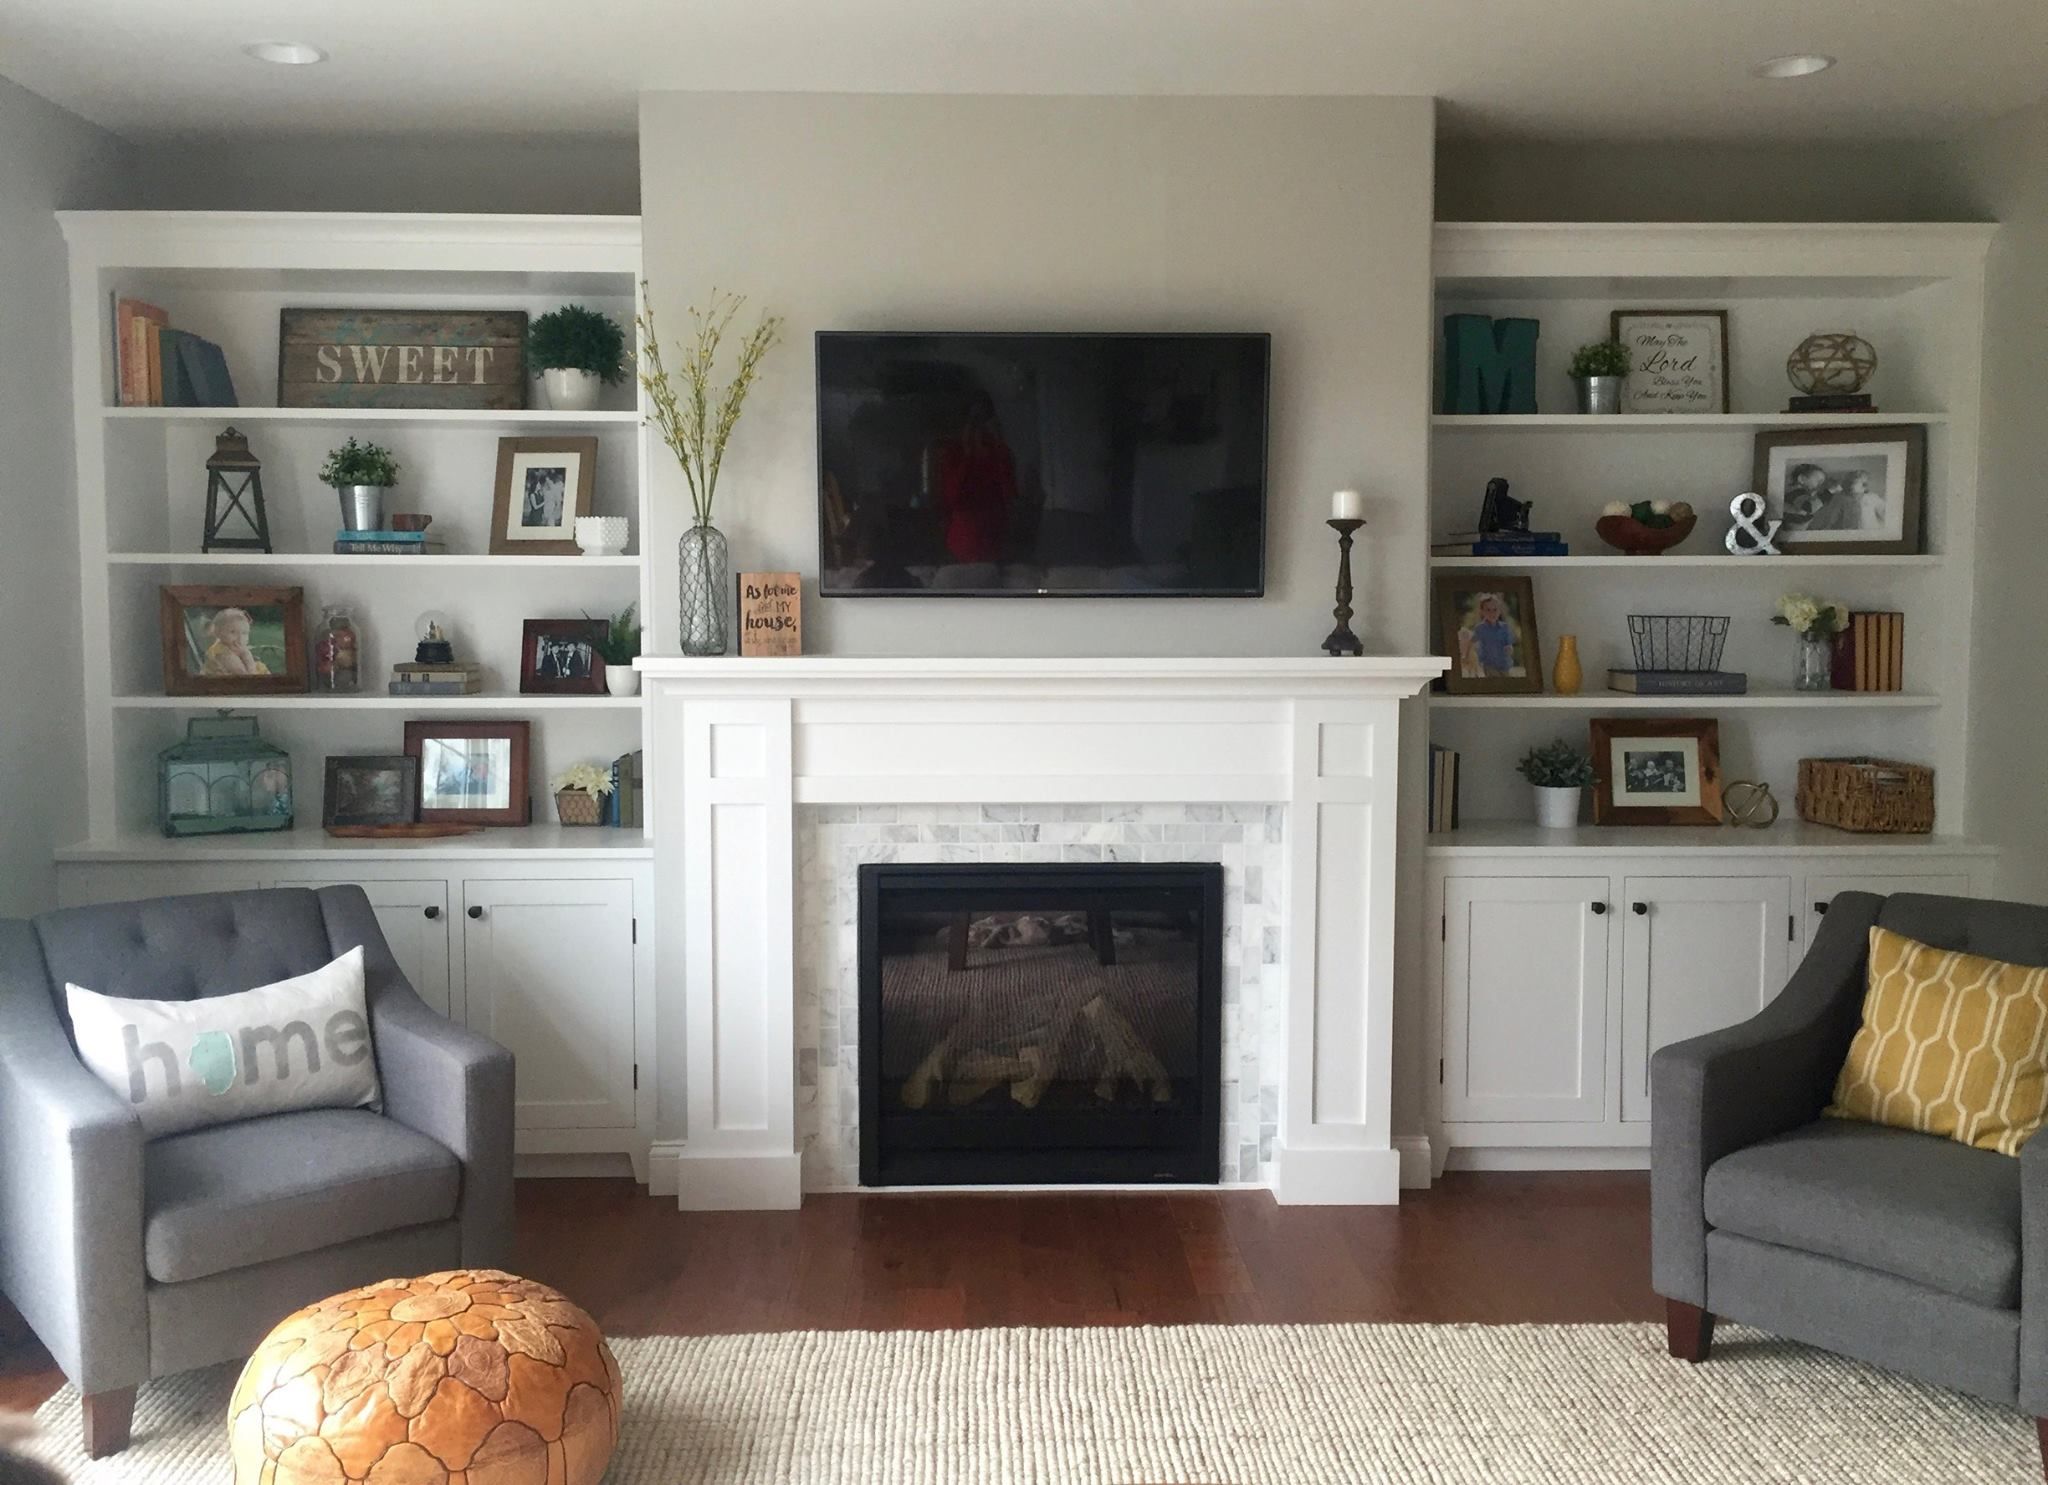 Long Fireplace Unique Instructions to Build This Fireplace Mantel with Built In